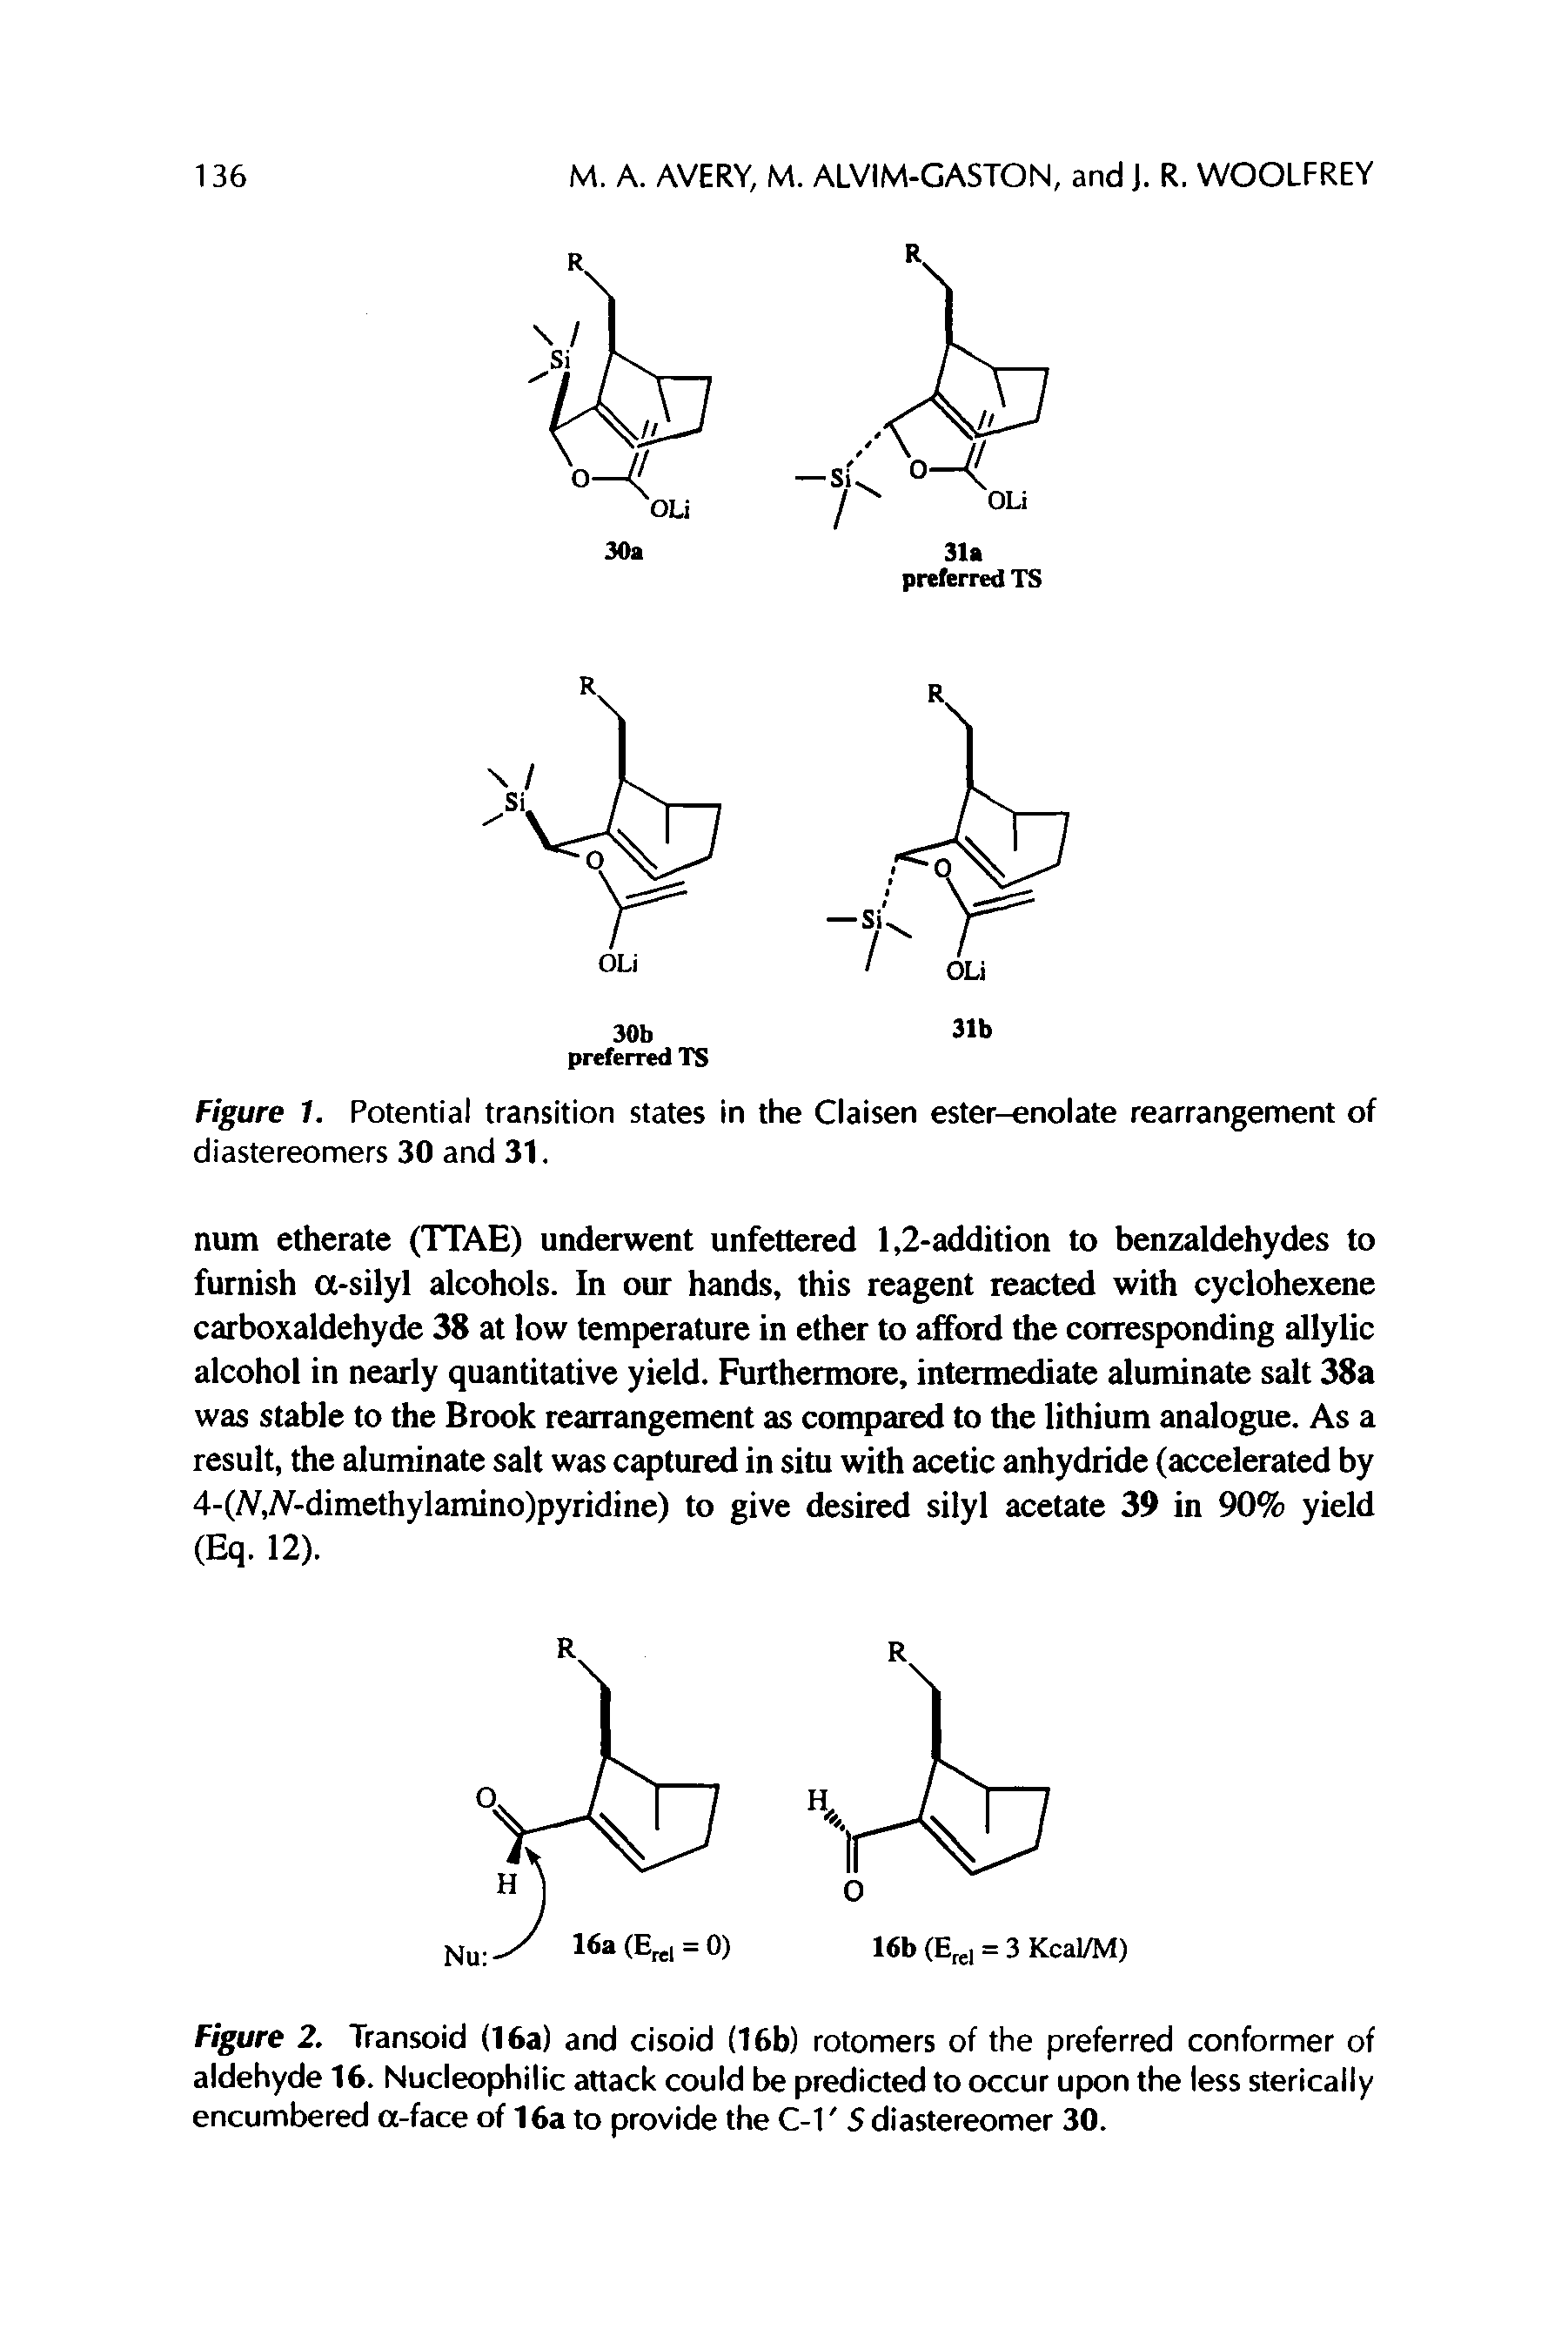 Figure 1. Potential transition states in the Claisen ester-enolate rearrangement of diastereomers 30 and 31.